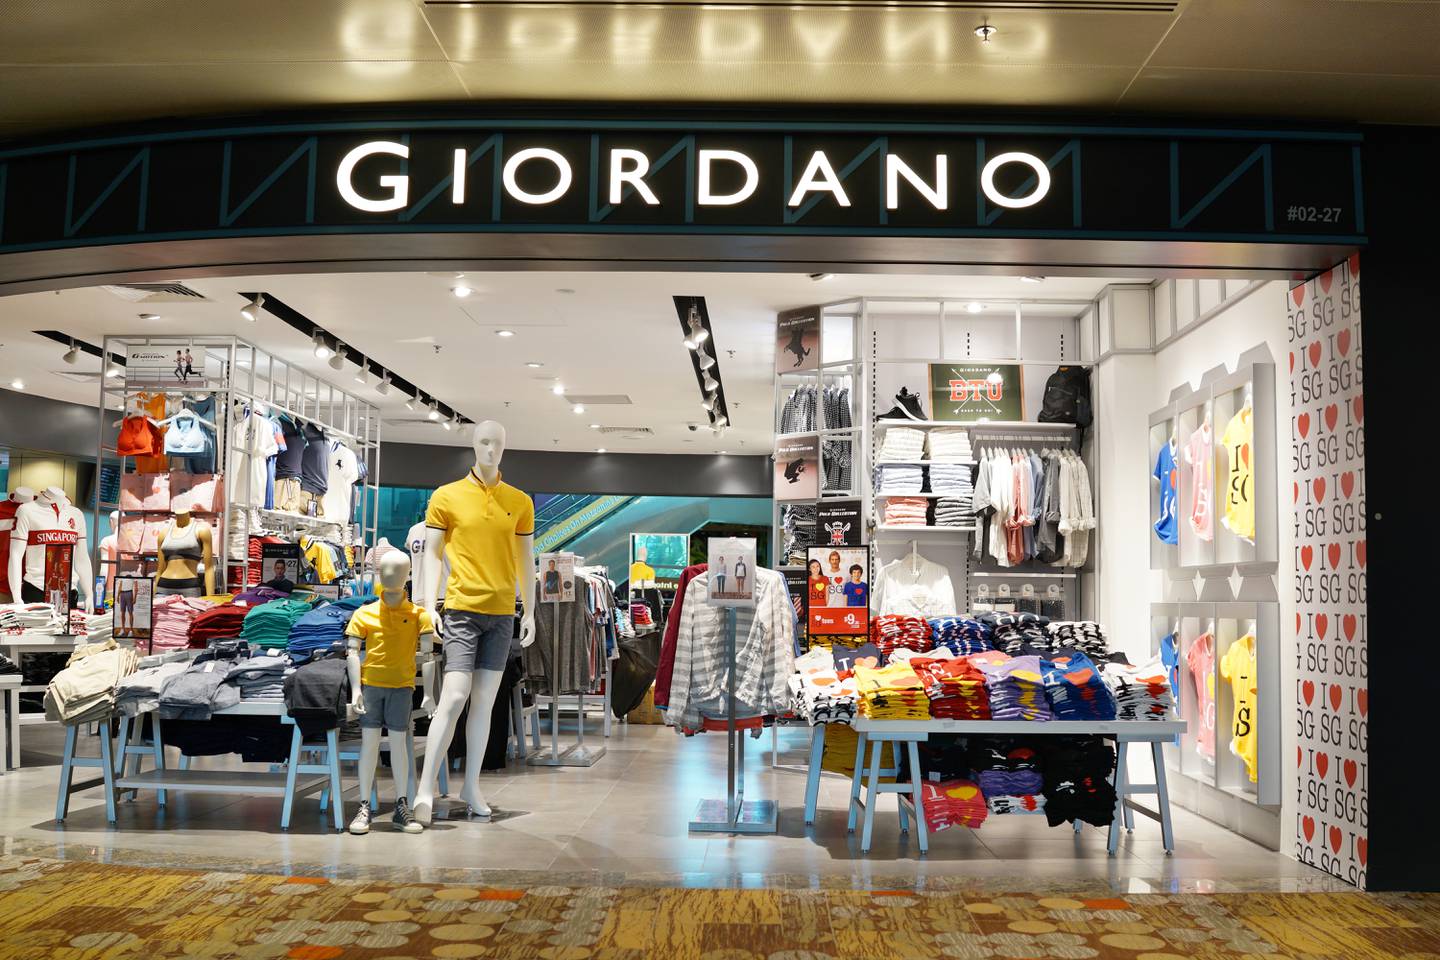 The exterior of a Giordano store in Singapore's Changi airport.